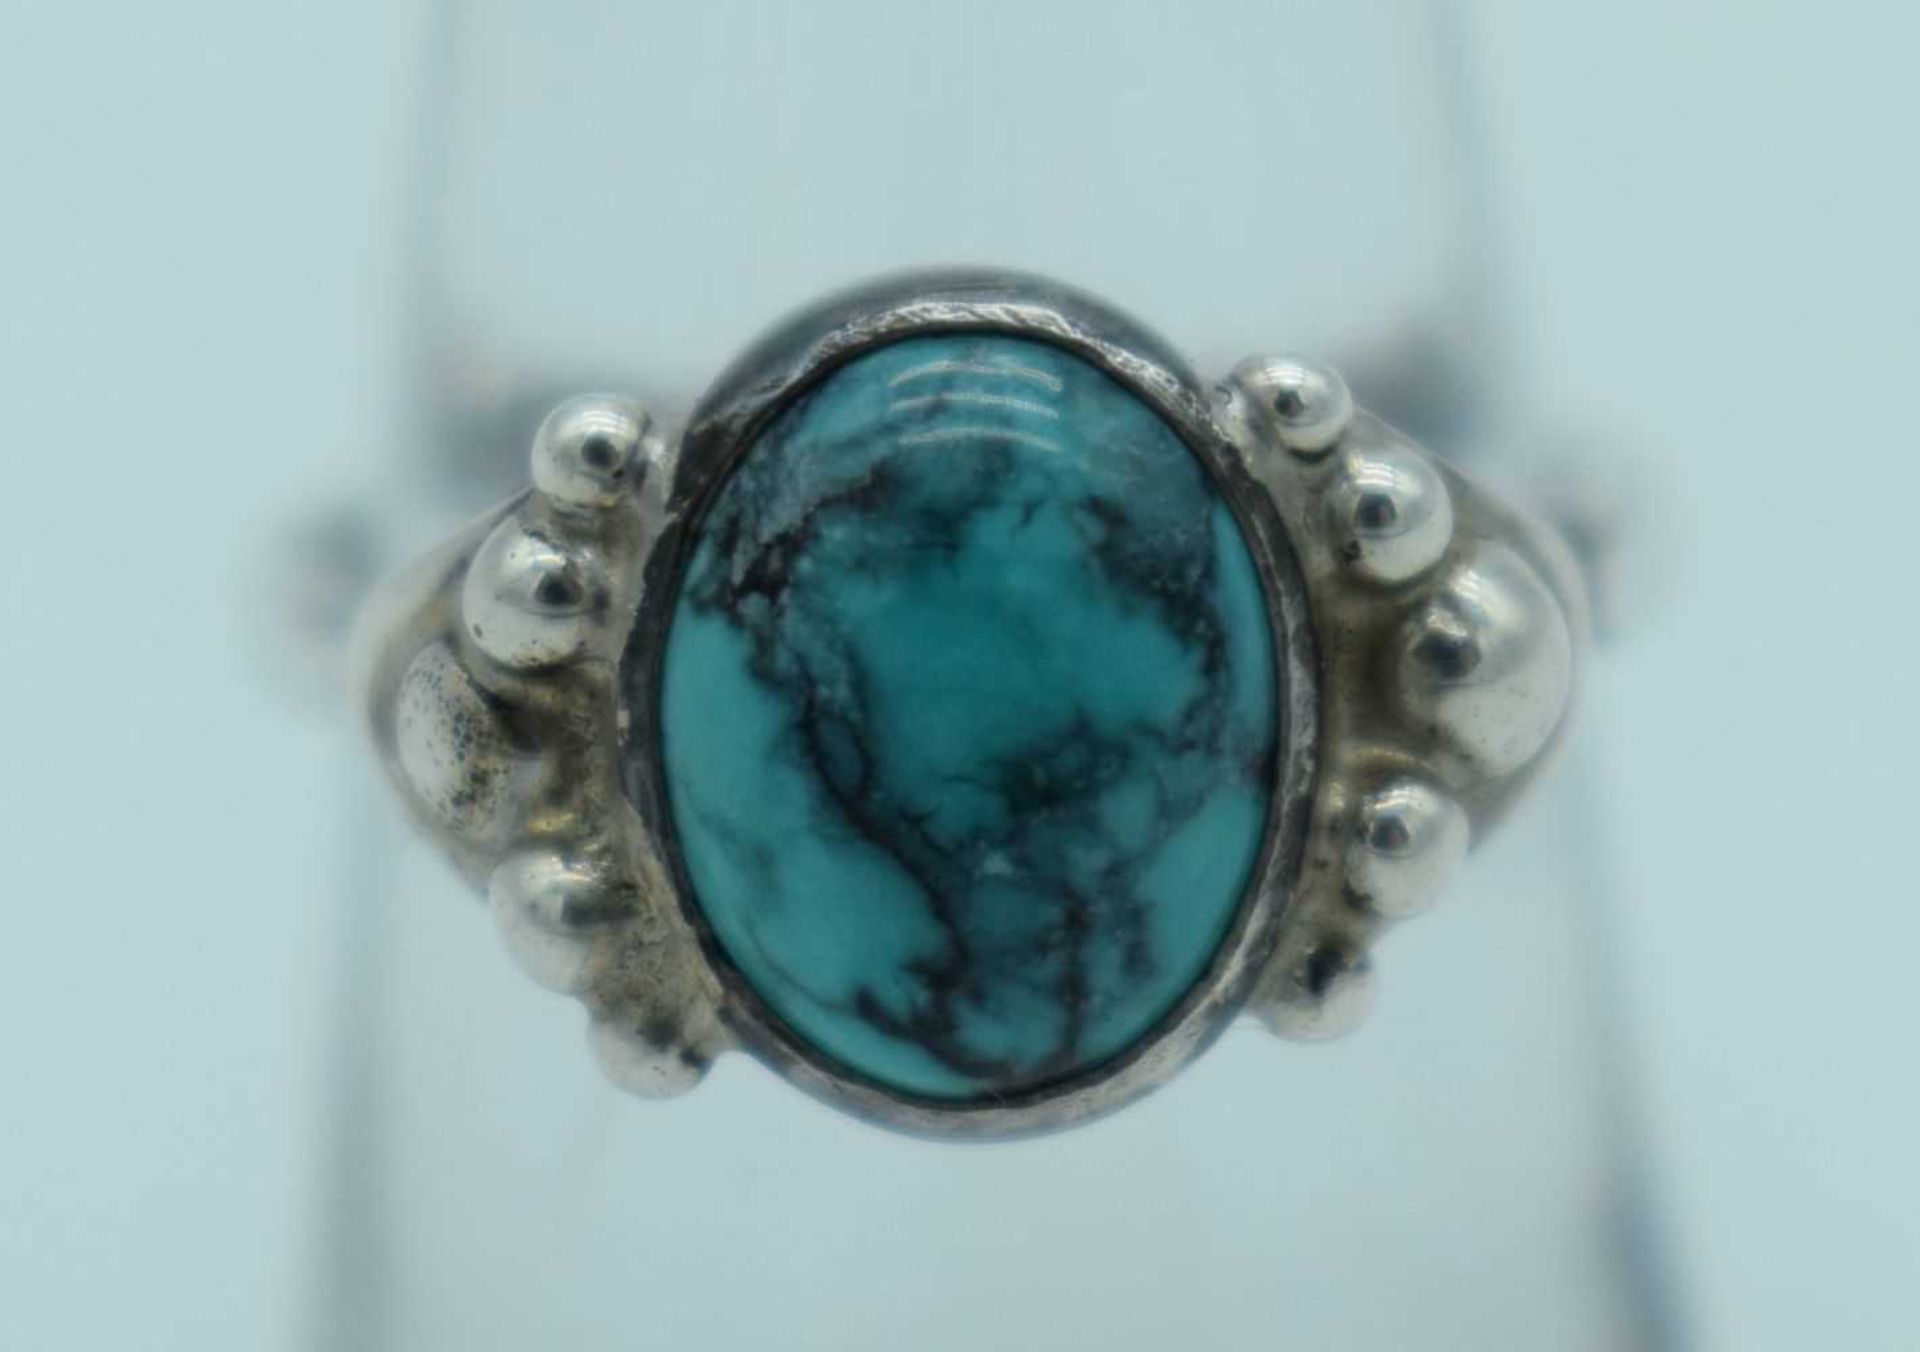 A TURQUOISE RING. M. 4 grams.